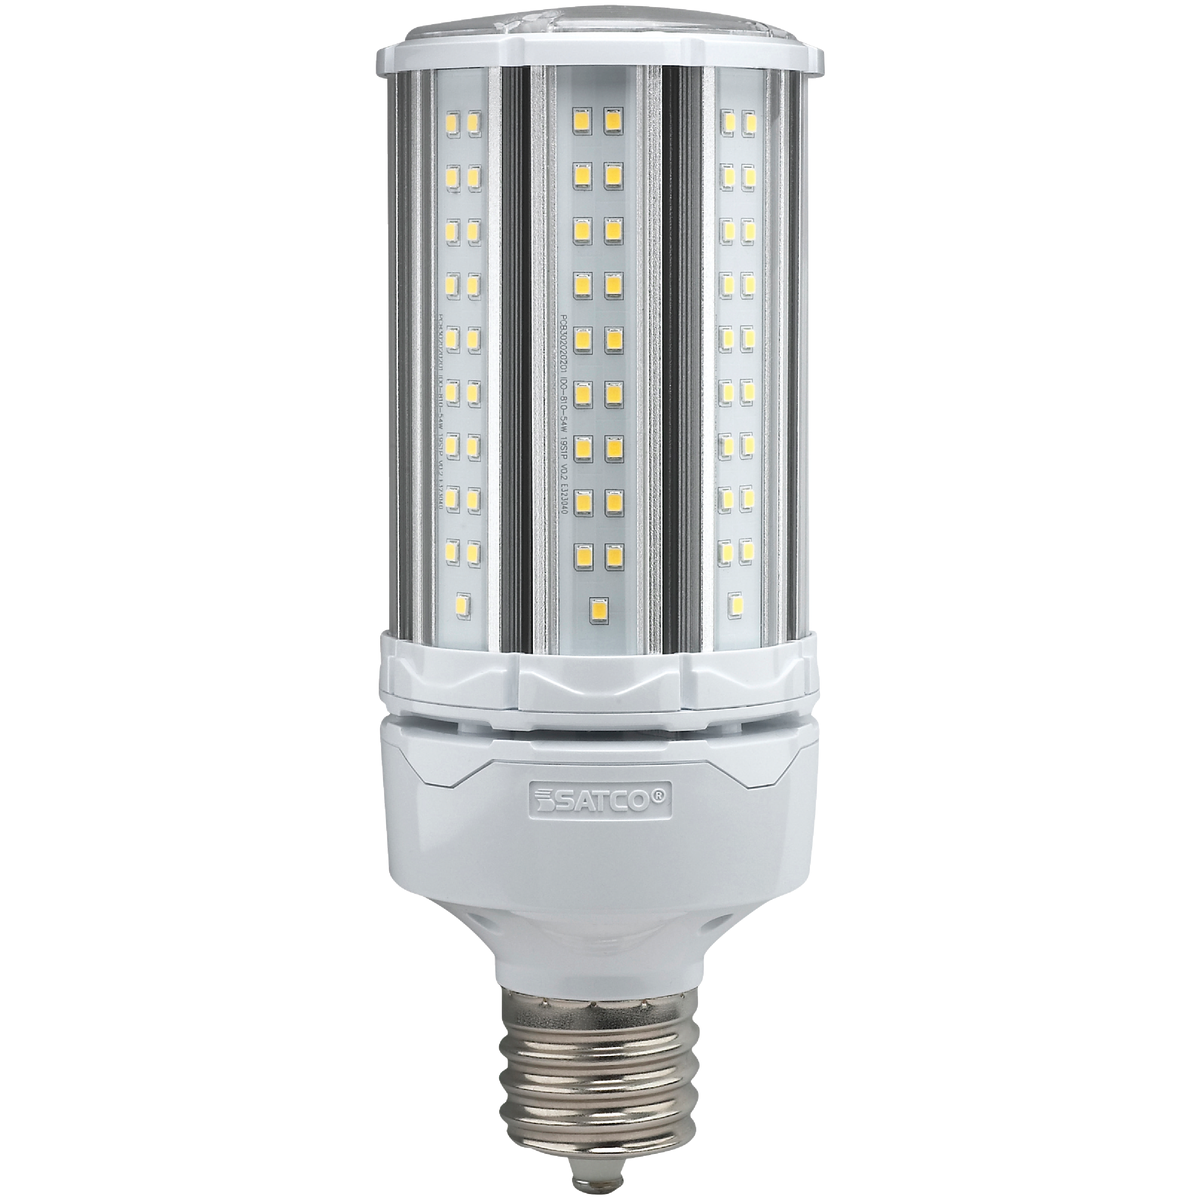 LED High-Intensity Replacement Light Bulb